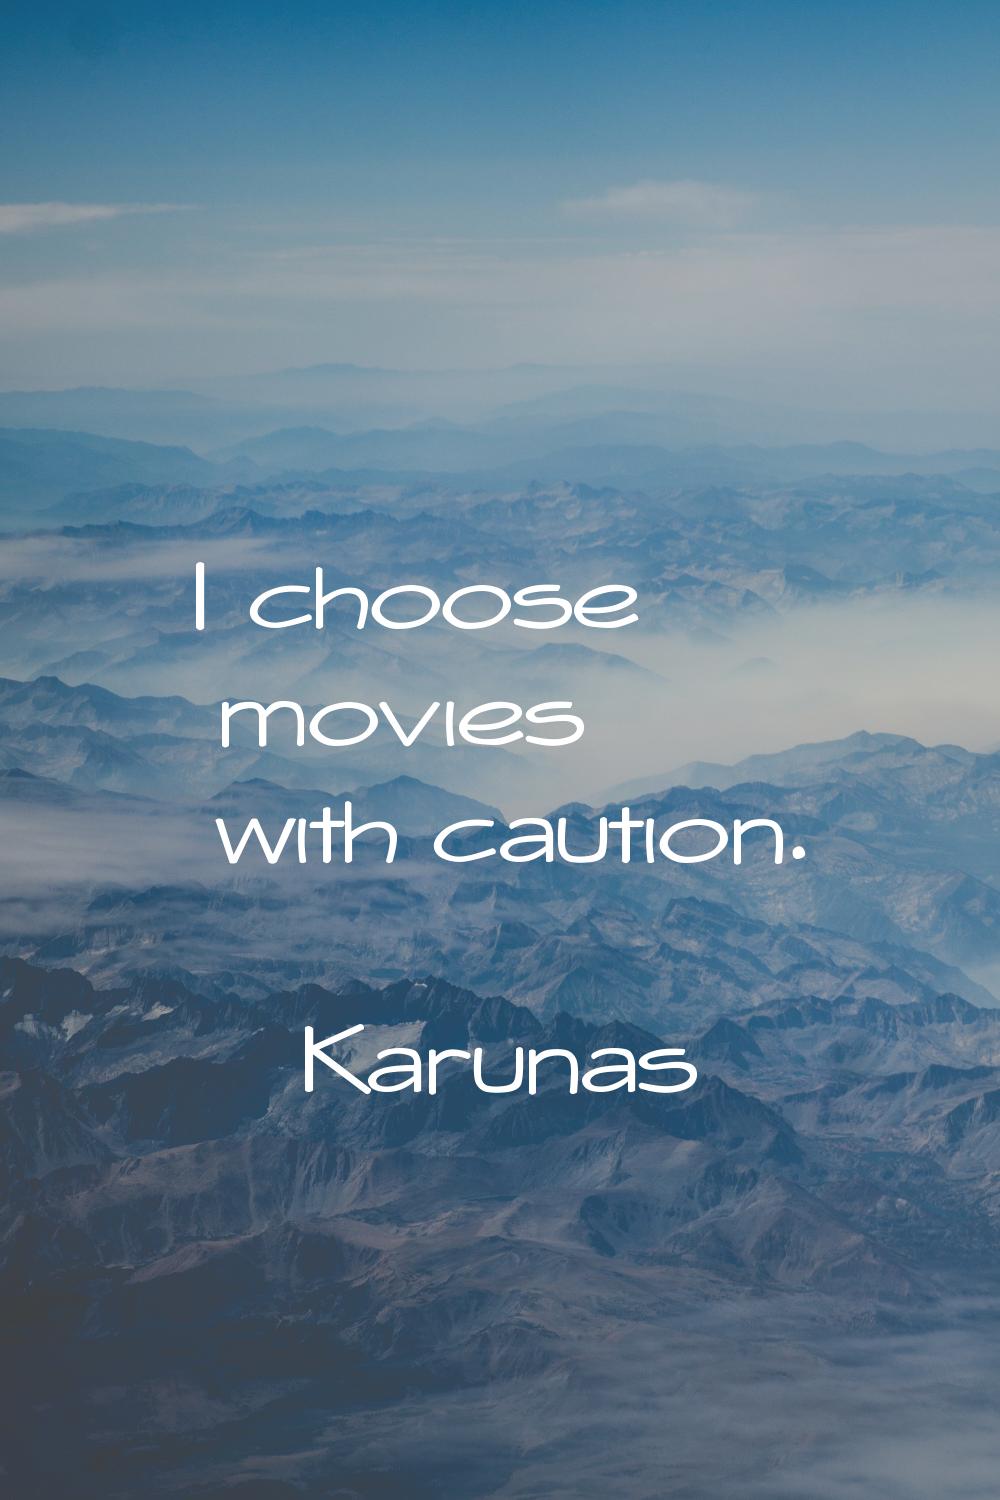 I choose movies with caution.